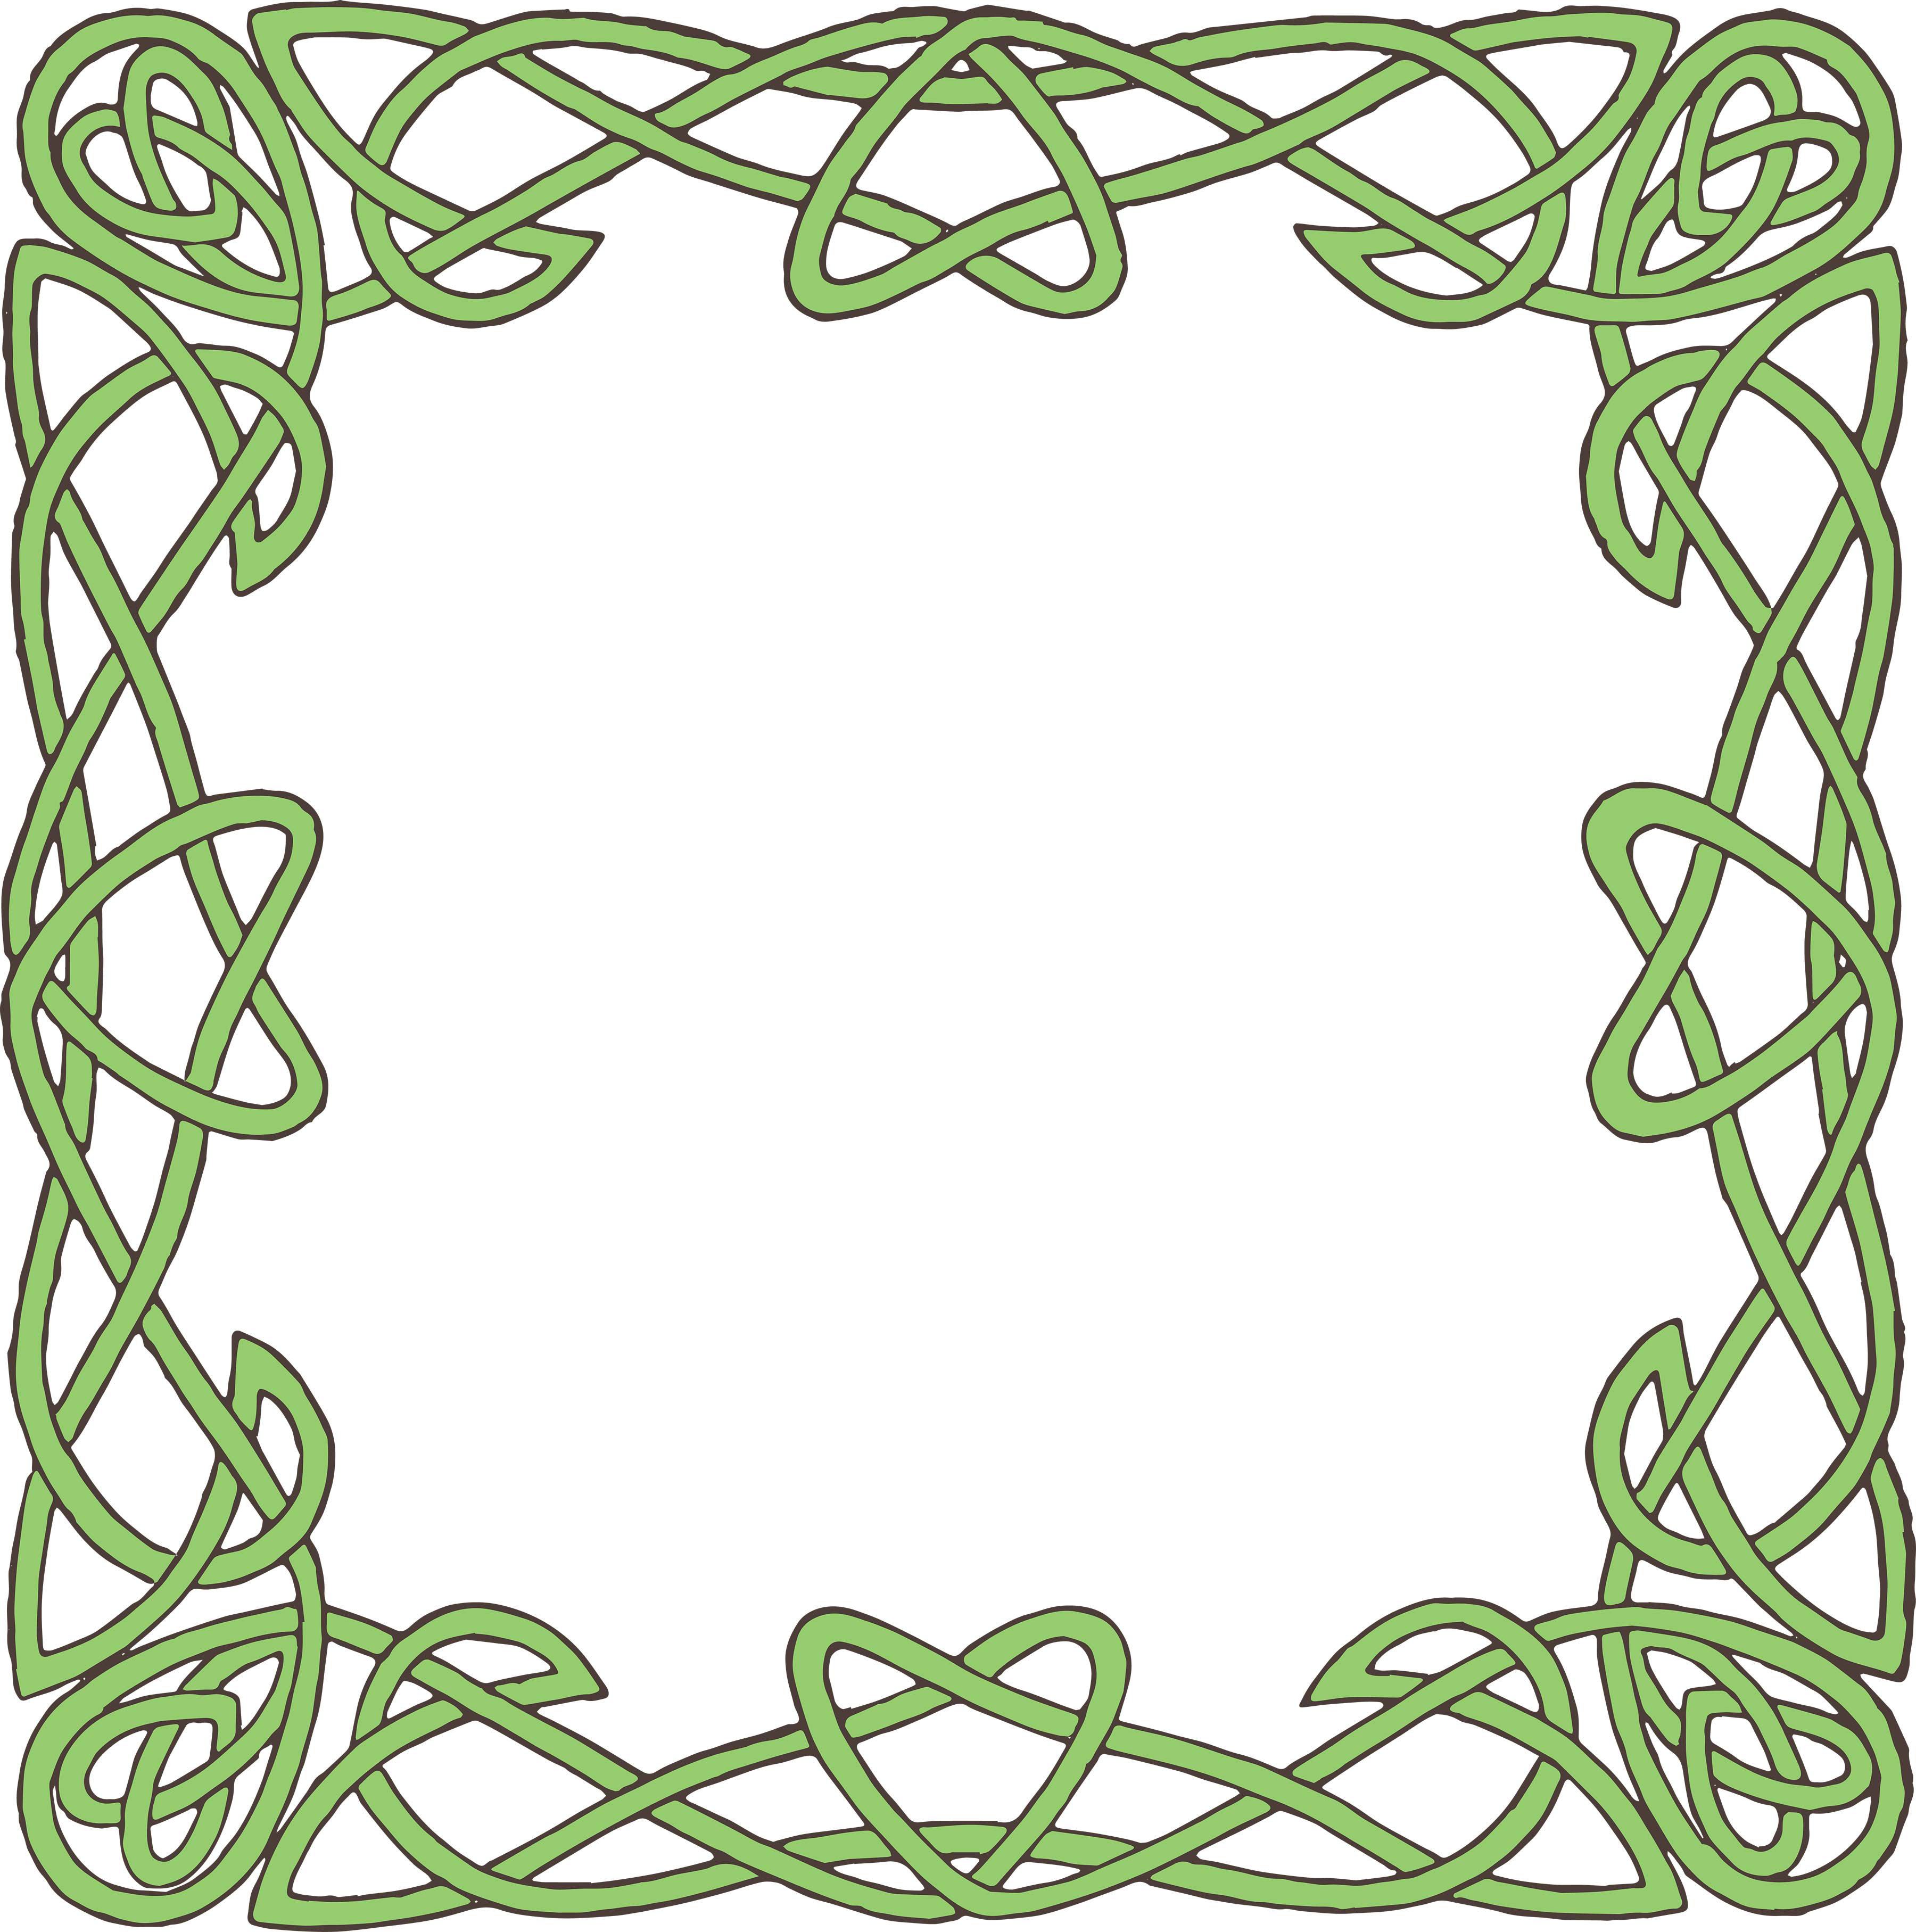 celtic-knot-border-clipart-clear-background-clip-art-library